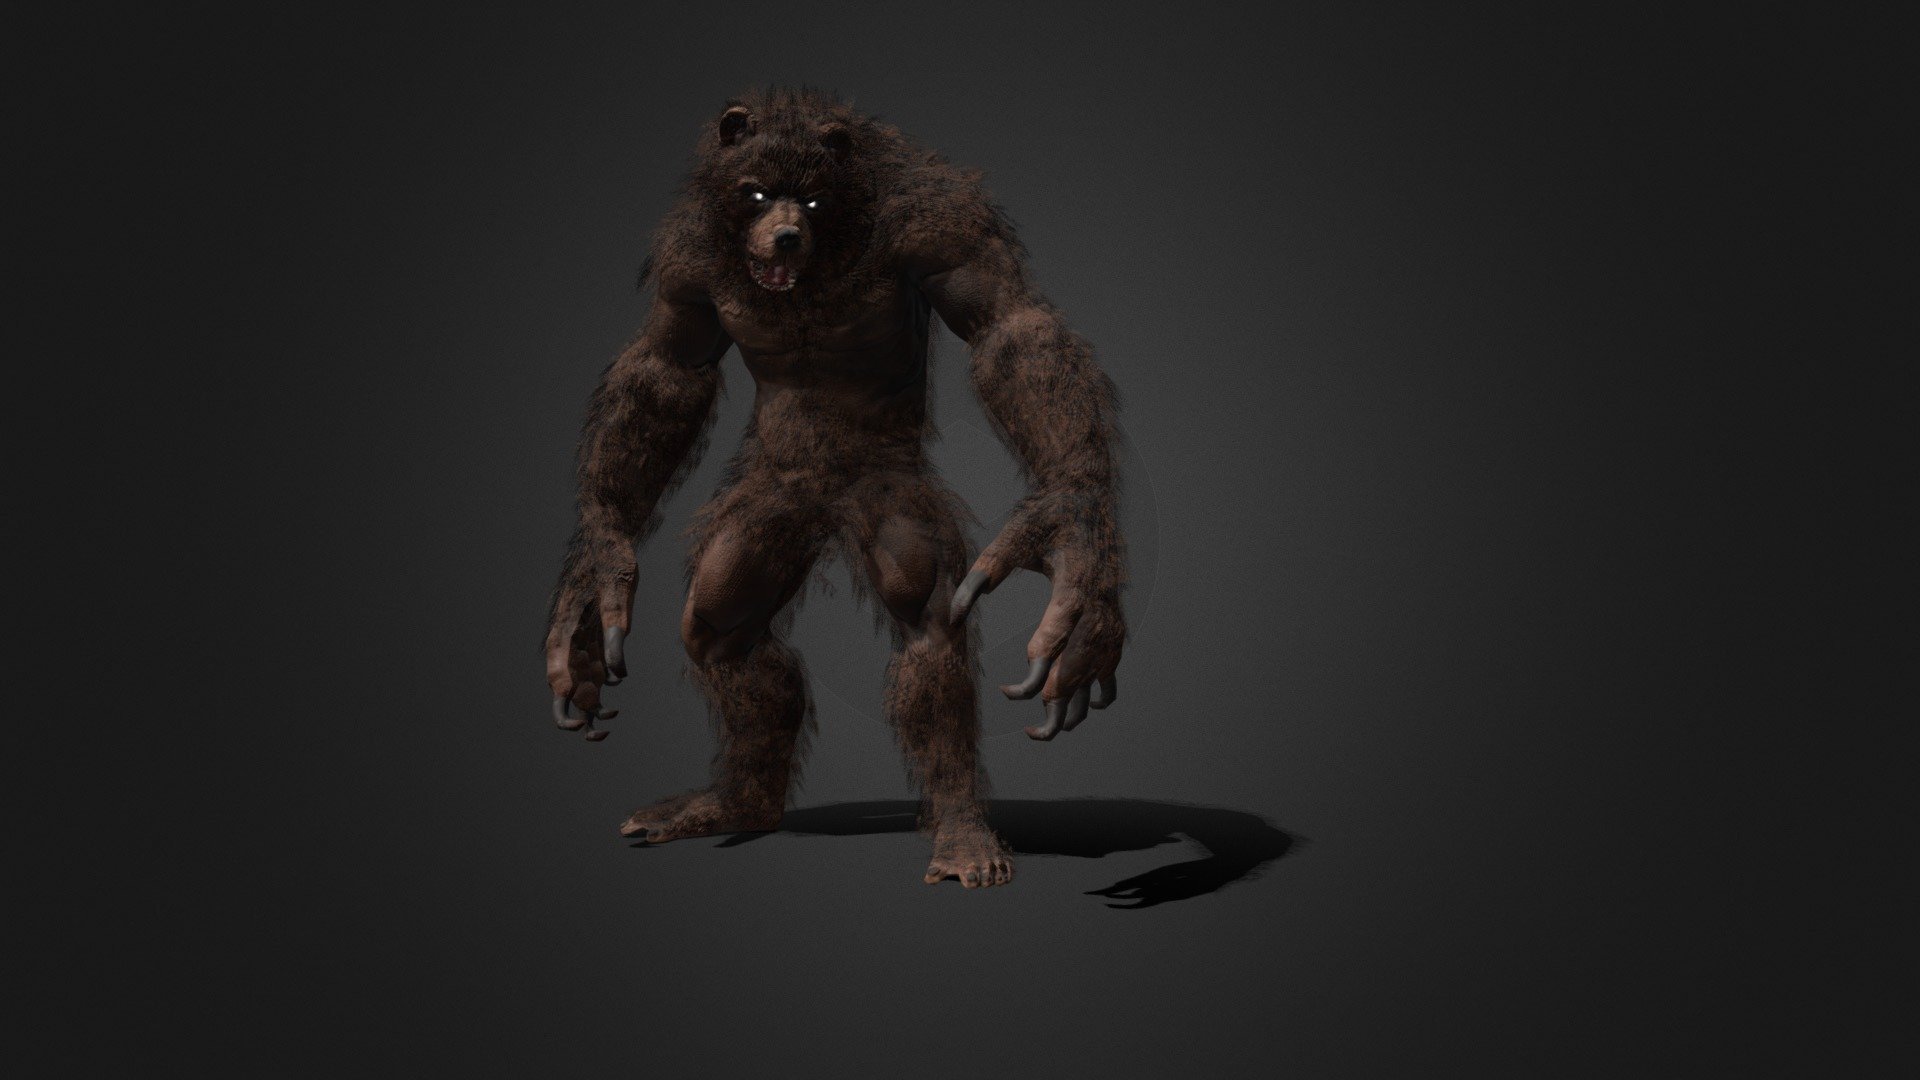 Low-poly model of the character Werebear
Suitable for games of different genre: RPG, strategy, first-person shooter, etc.
In the archive, the basic mesh (fbx and maya)

Textures pack two map 4096x4096 body and fur 2048

In the model it is desirable to use a shader with a two-sided display of polygons.

The model contains 32 animations
atack (x9)
walking(x3)
running (x4)
Straif LR (x2)
idle (x4)
death (x3)
get hit (x3)
jump
rage(x2)

faces 23881
verts 74166
tris 47478 - Werebear - Buy Royalty Free 3D model by dremorn 3d model